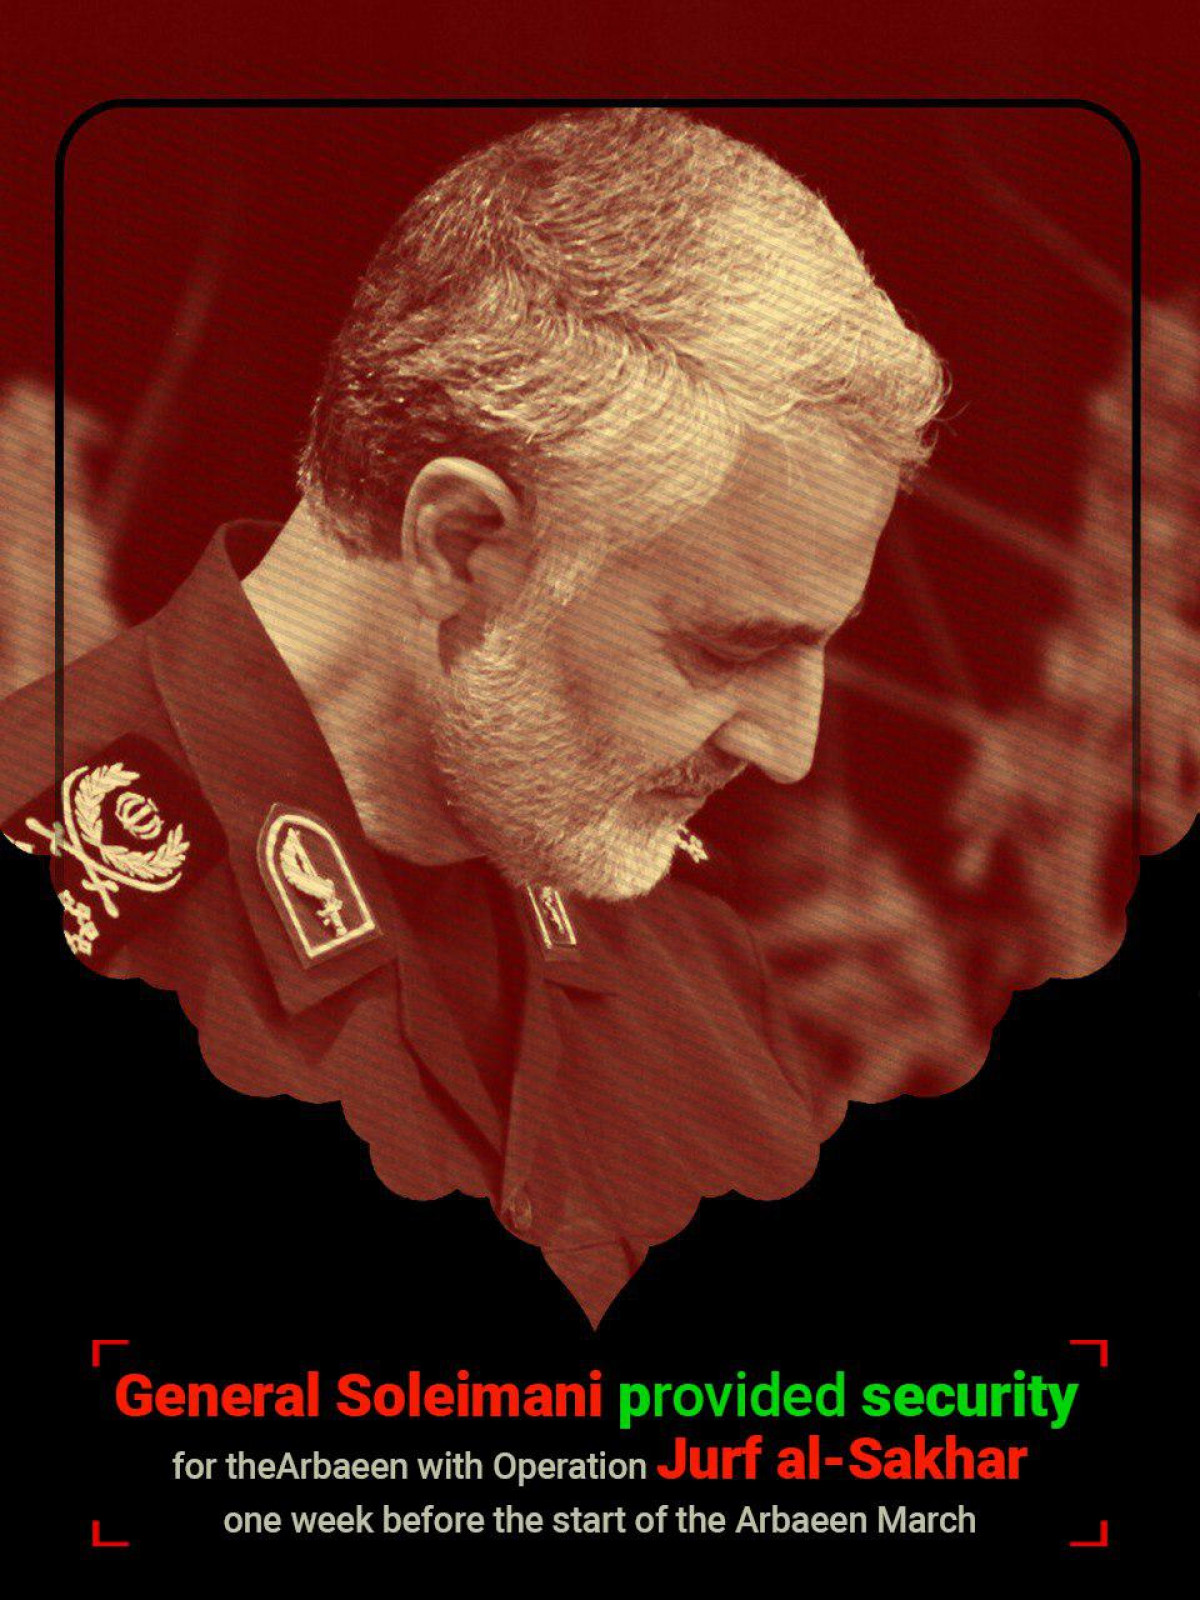 General Soleimani provided security for theArbaeen with Operation Jurf al-Sakhar one week before the start of the Arbaeen March